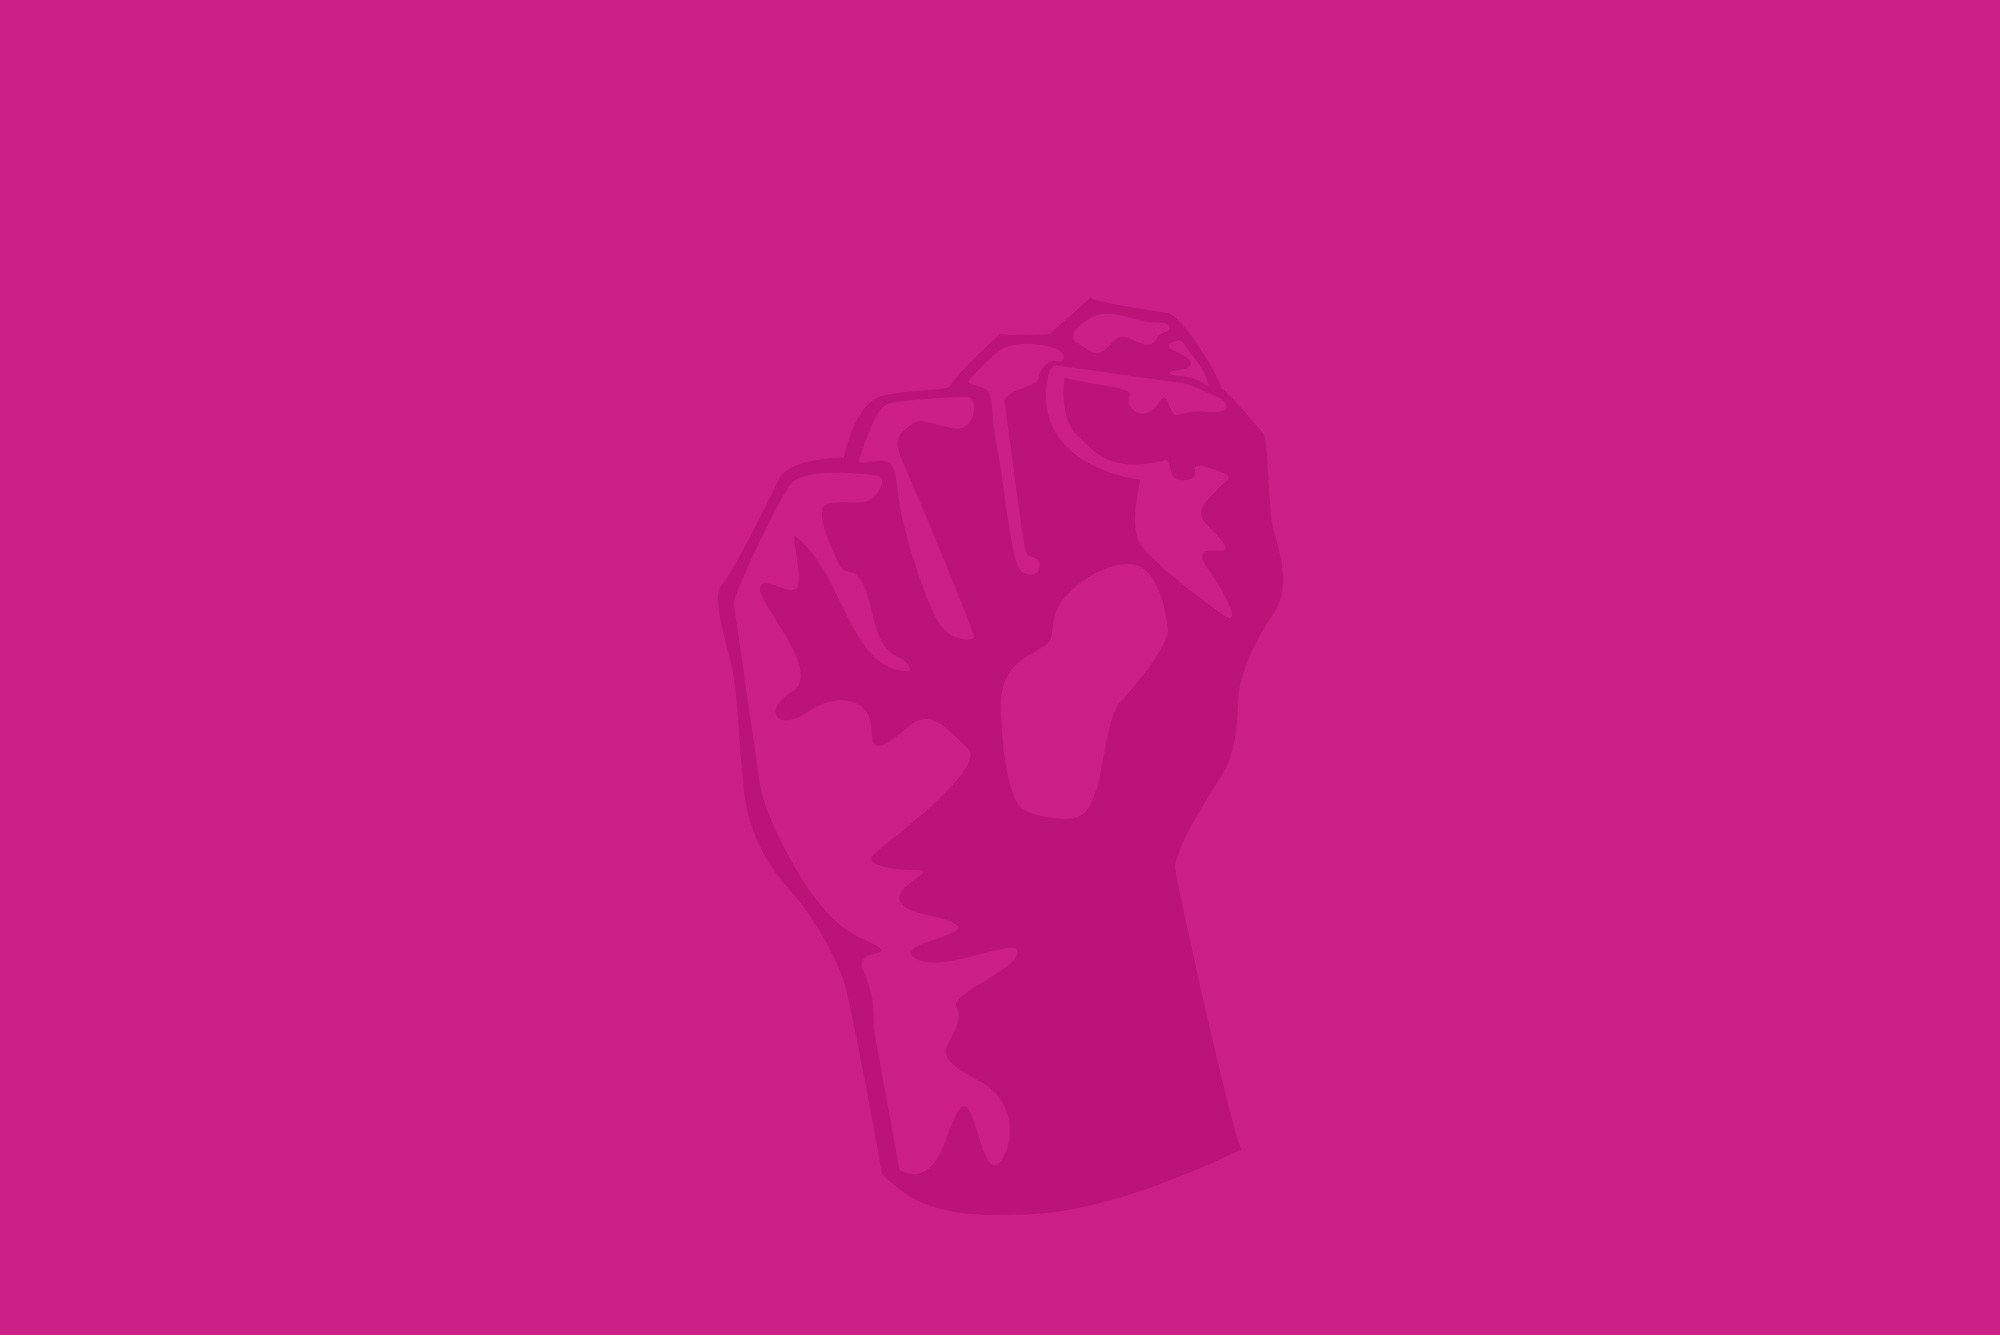 Clenched fist on a pink background - mobile revolution